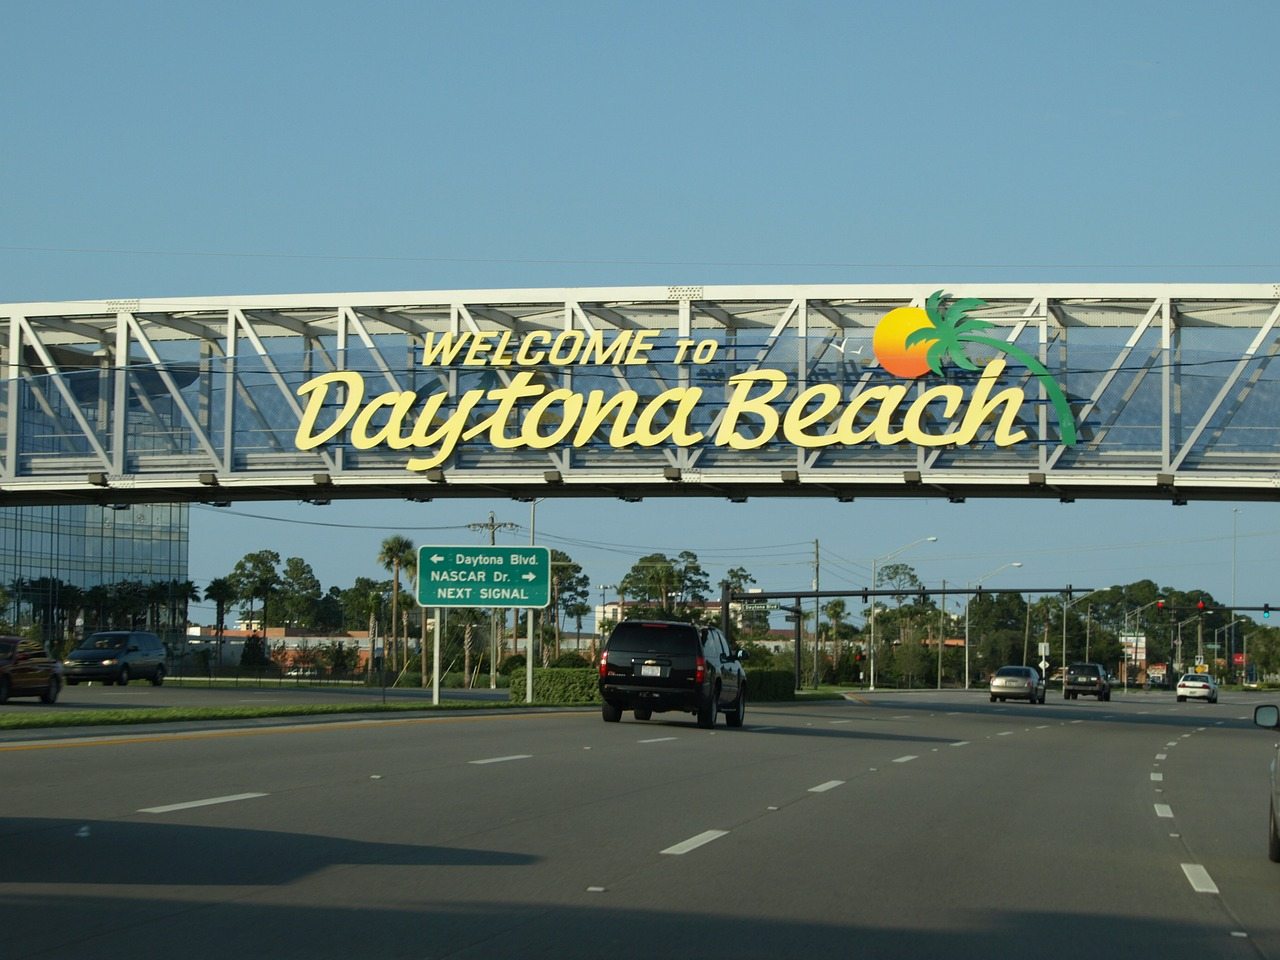 10 Things You Can’t Miss in Daytona